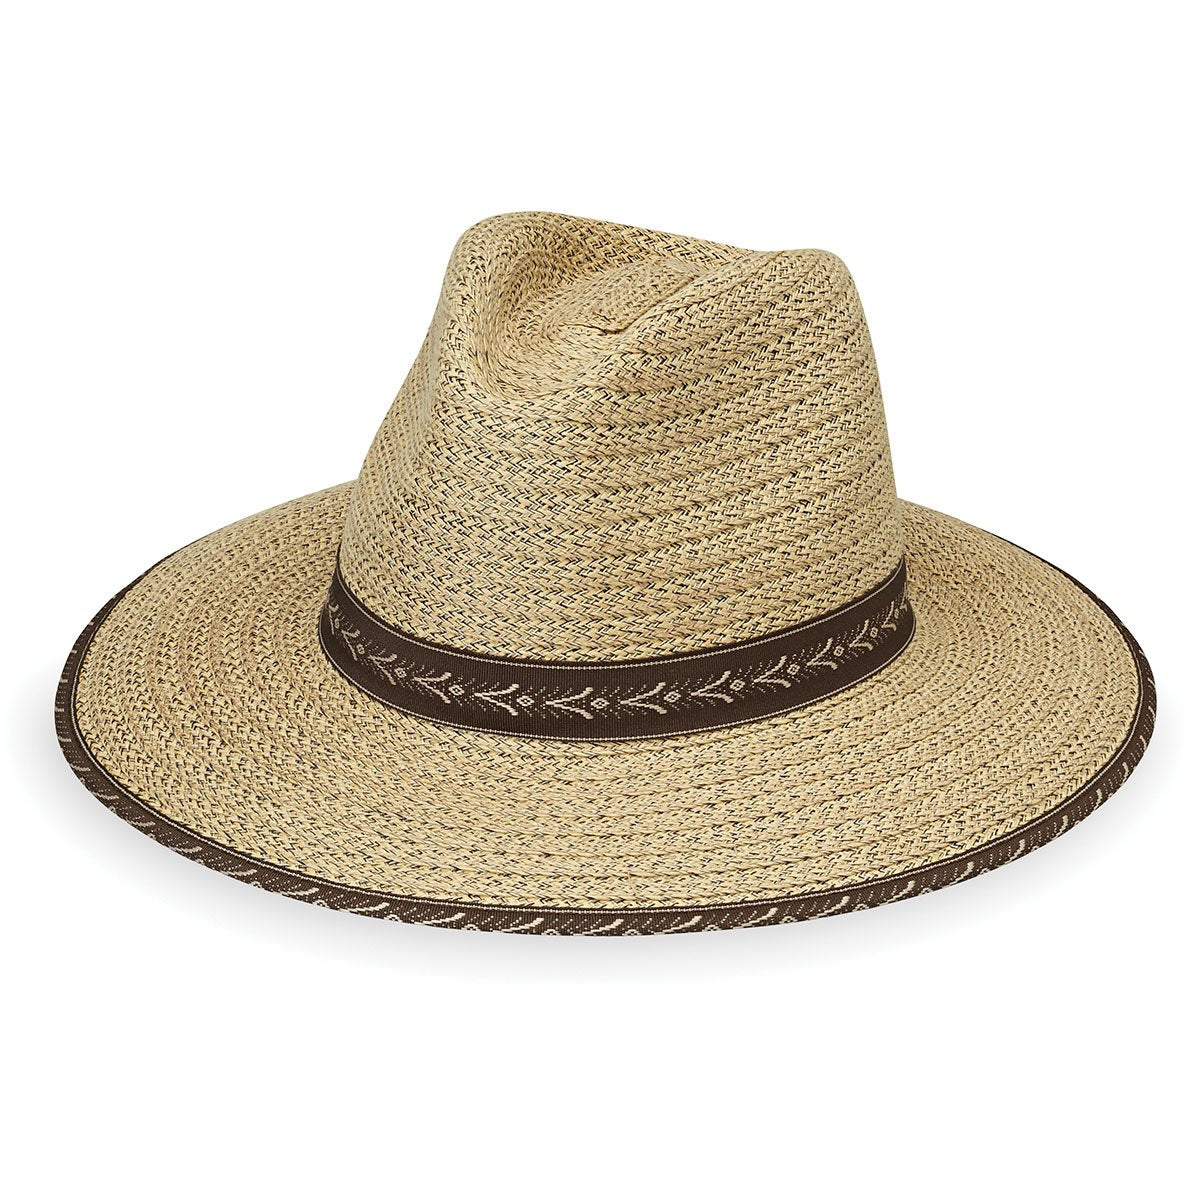 Featuring Men's Fedora Style Cabo Beach Sun Hat with Chinstrap from Wallaroo